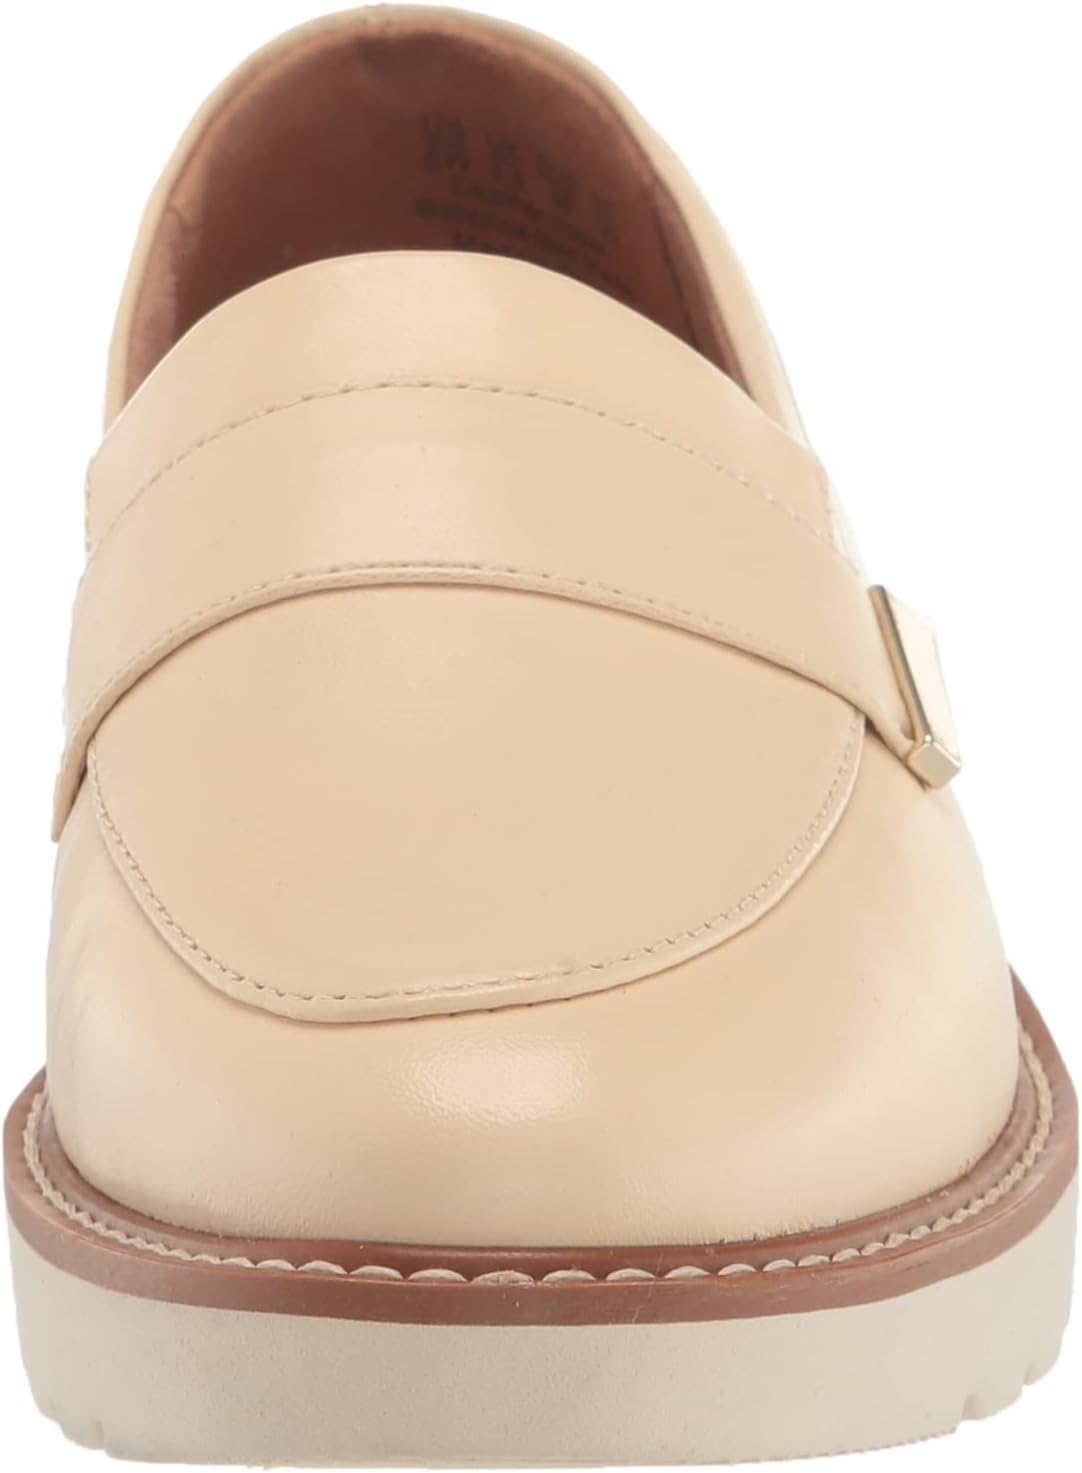 Naturalizer Adiline Women's Loafers NW/OB